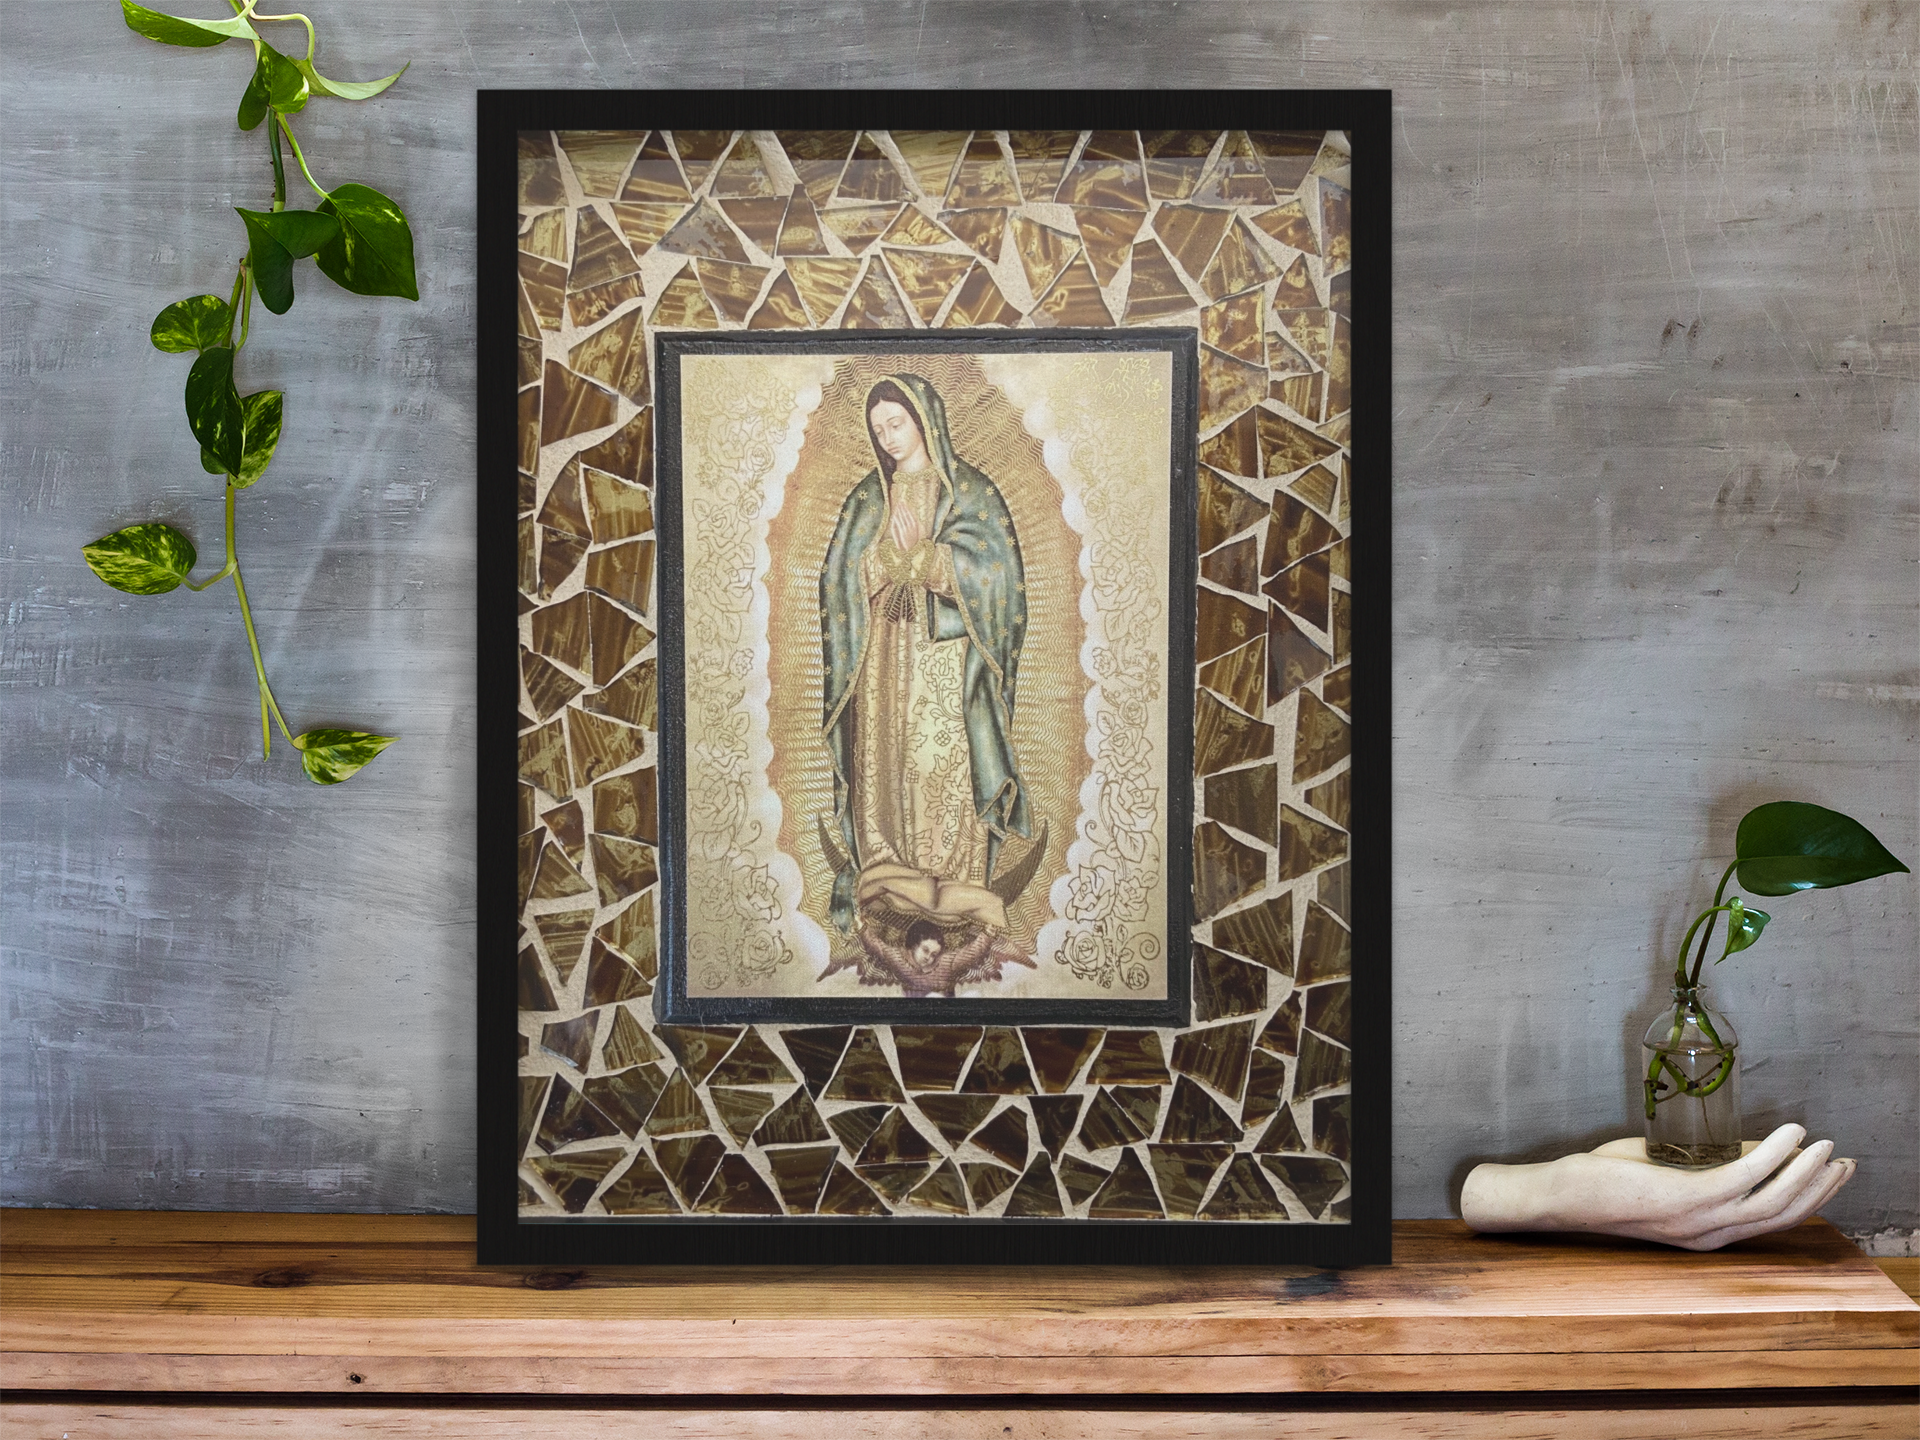 Our Lady of Guadalupe Art Wall Framed Mosaic, Our Lady of Guadalupe Mosaic Art Catholic Art Catholic Home Decor Framed Virgin Mary, caatholic art, catholic painting, catholic wall decor, virgin mary art, virgin mary picture, virgin mary mosaic, st mary art, st mary painting